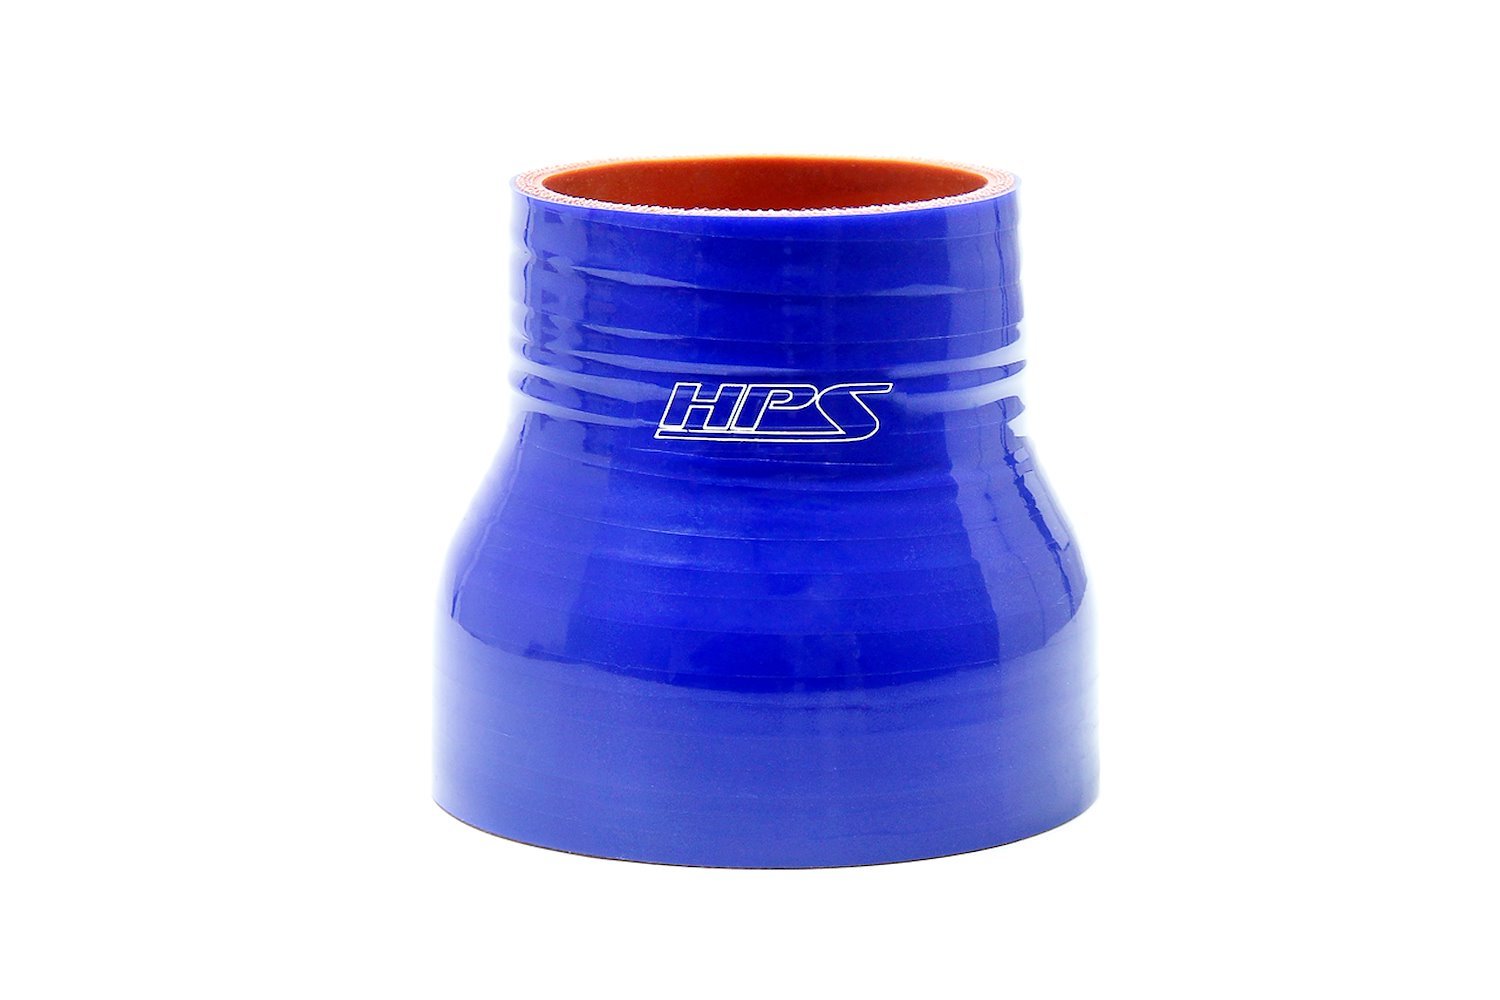 HTSR-275-350-L4-BLUE Silicone Reducer Hose, High-Temp 4-Ply Reinforced, 2-3/4 in. - 3-1/2 in. ID, 4 in. Long, Blue